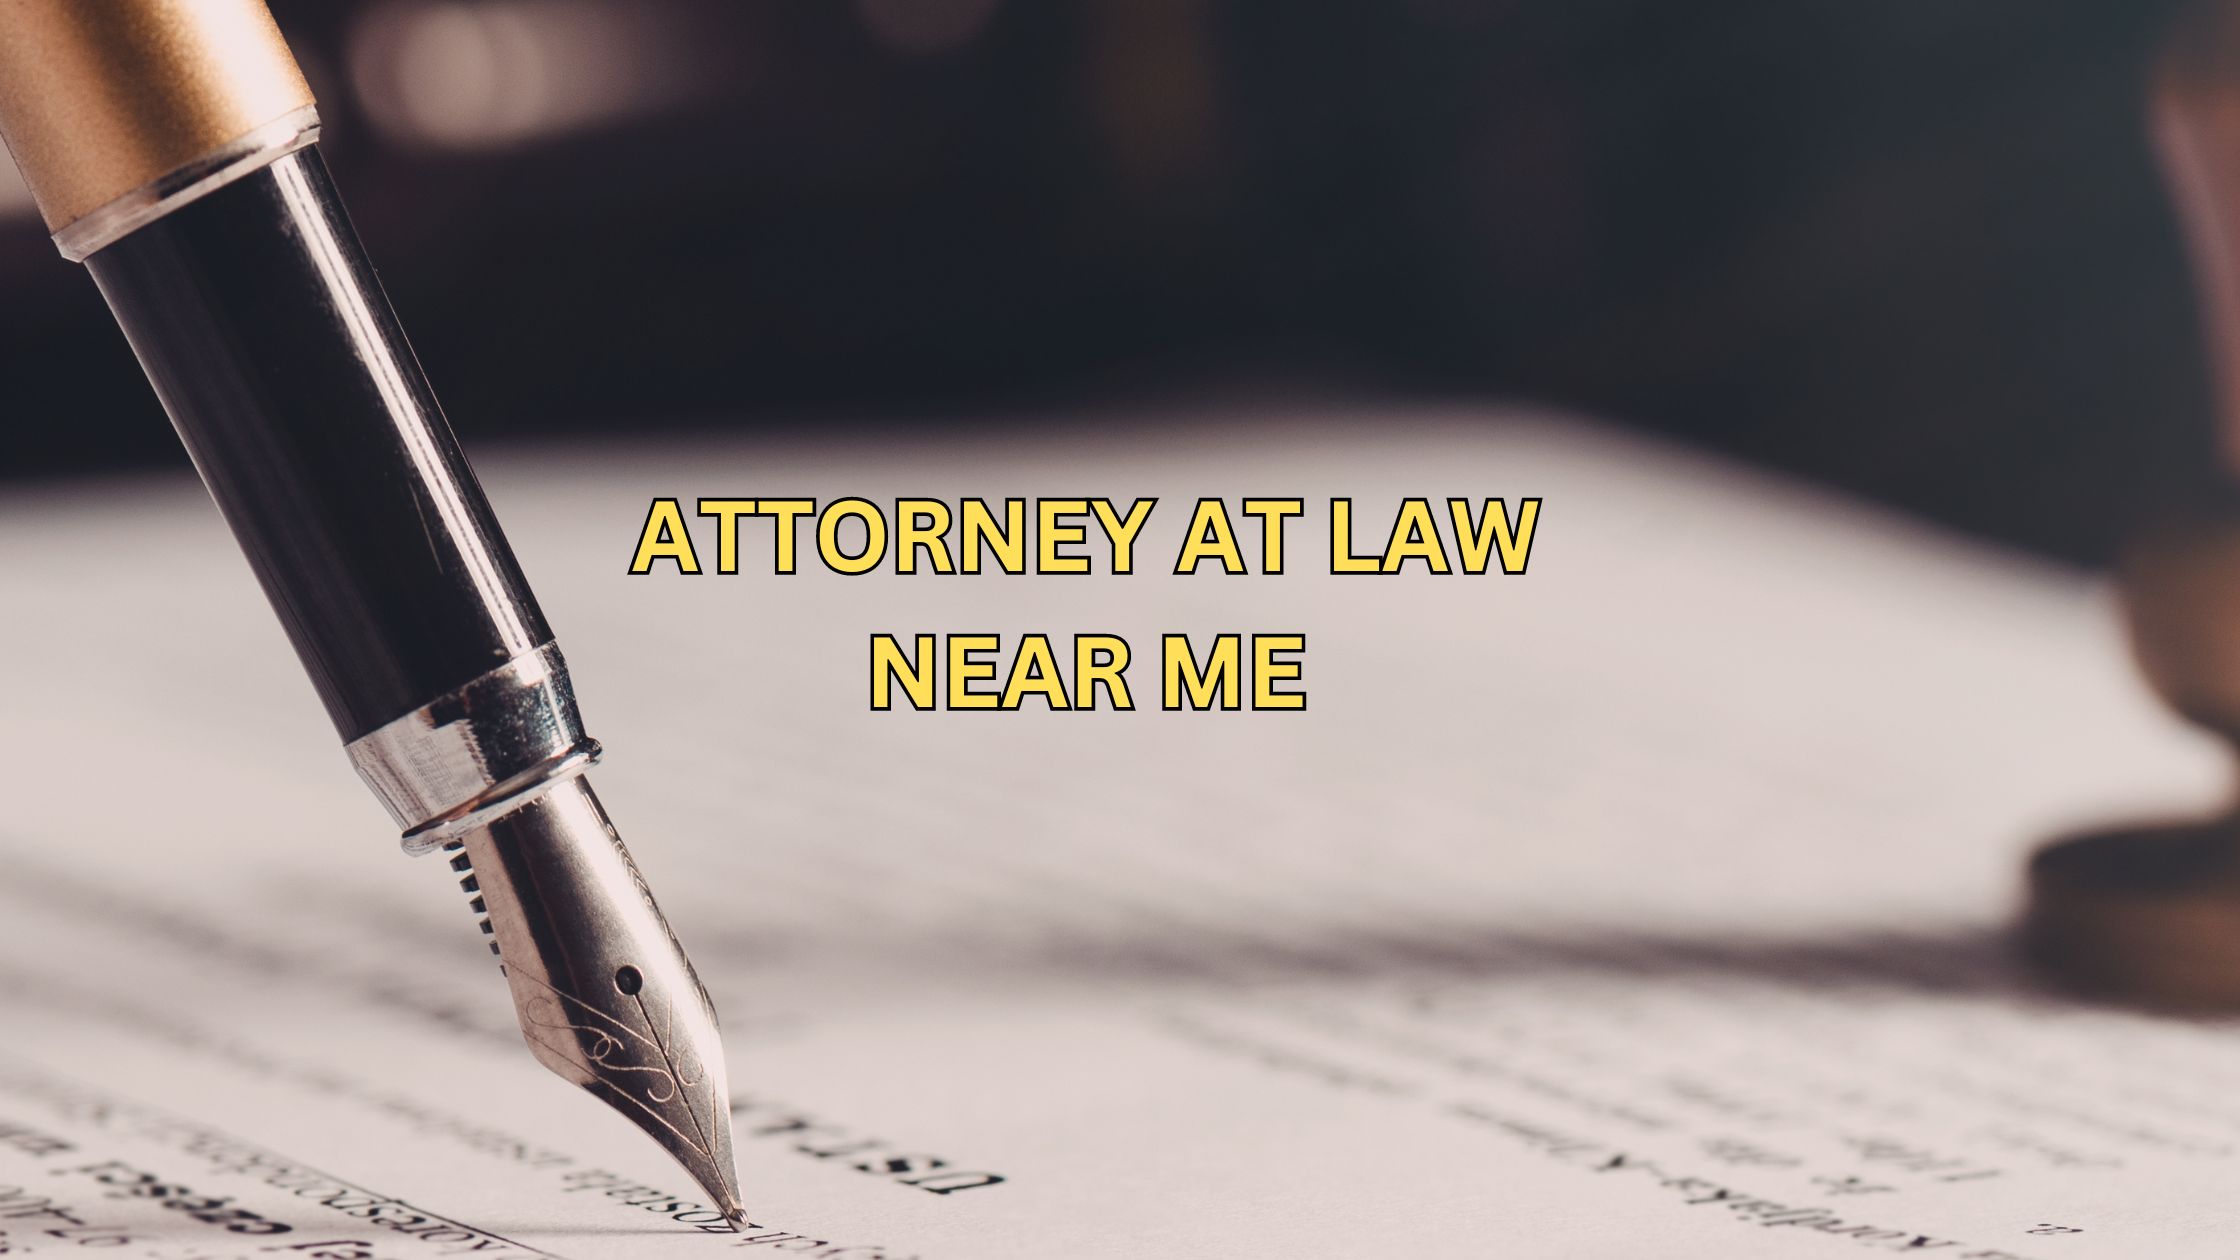 You are currently viewing The Importance of Hiring an Experienced Attorney at Law Near Me | 7 Most Important Points